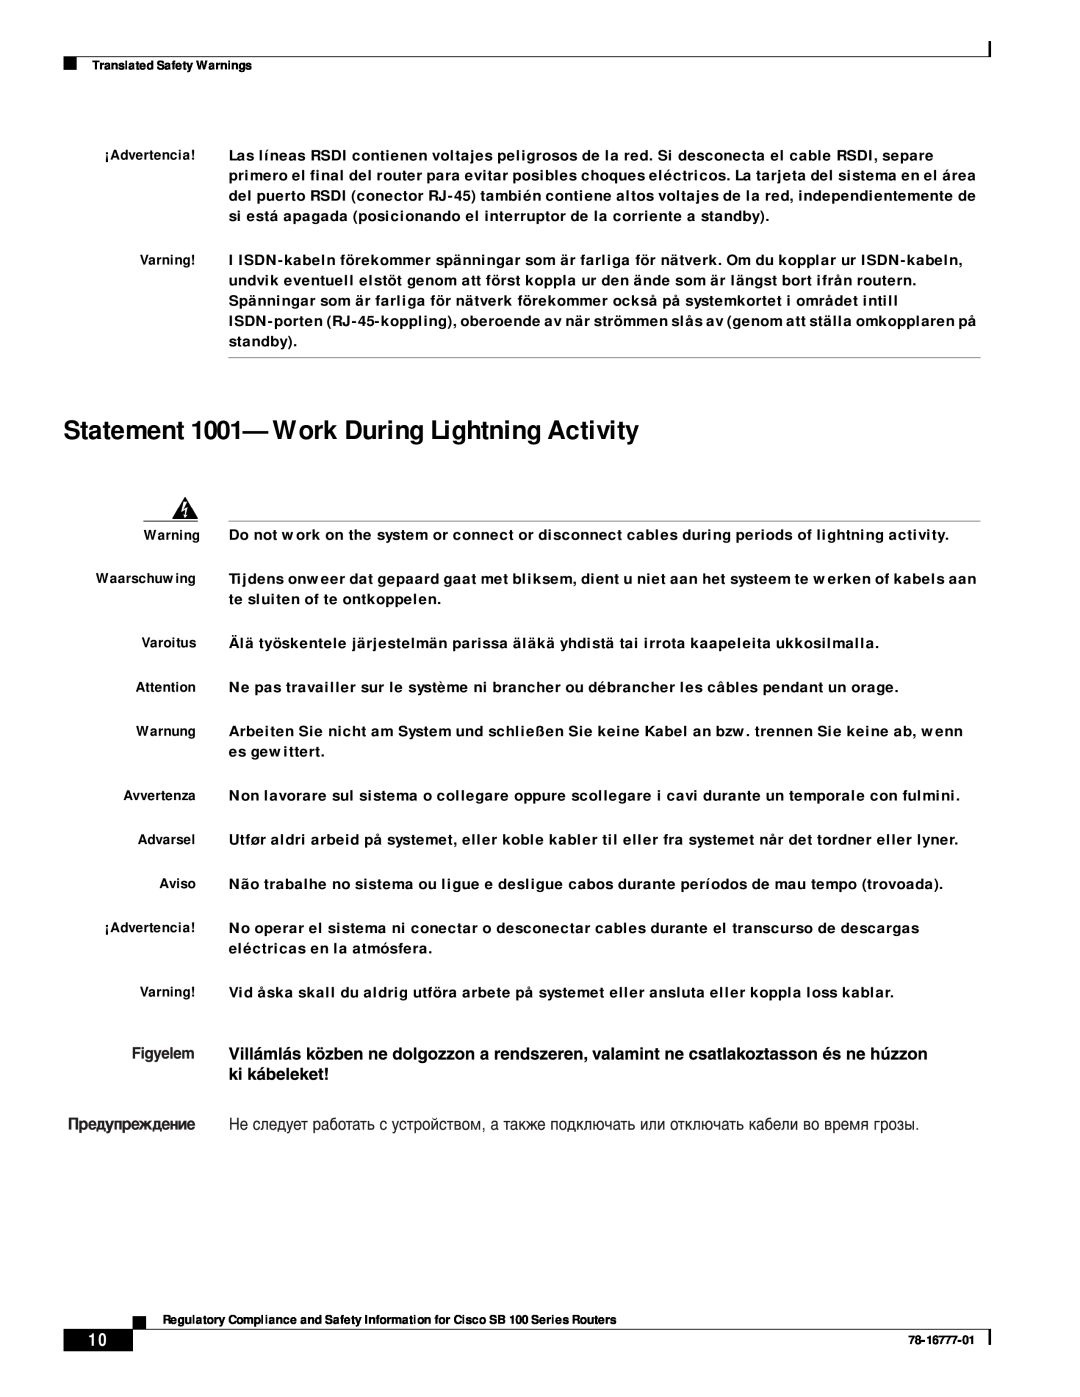 Cisco Systems SB 100 Series manual Statement 1001-Work During Lightning Activity 